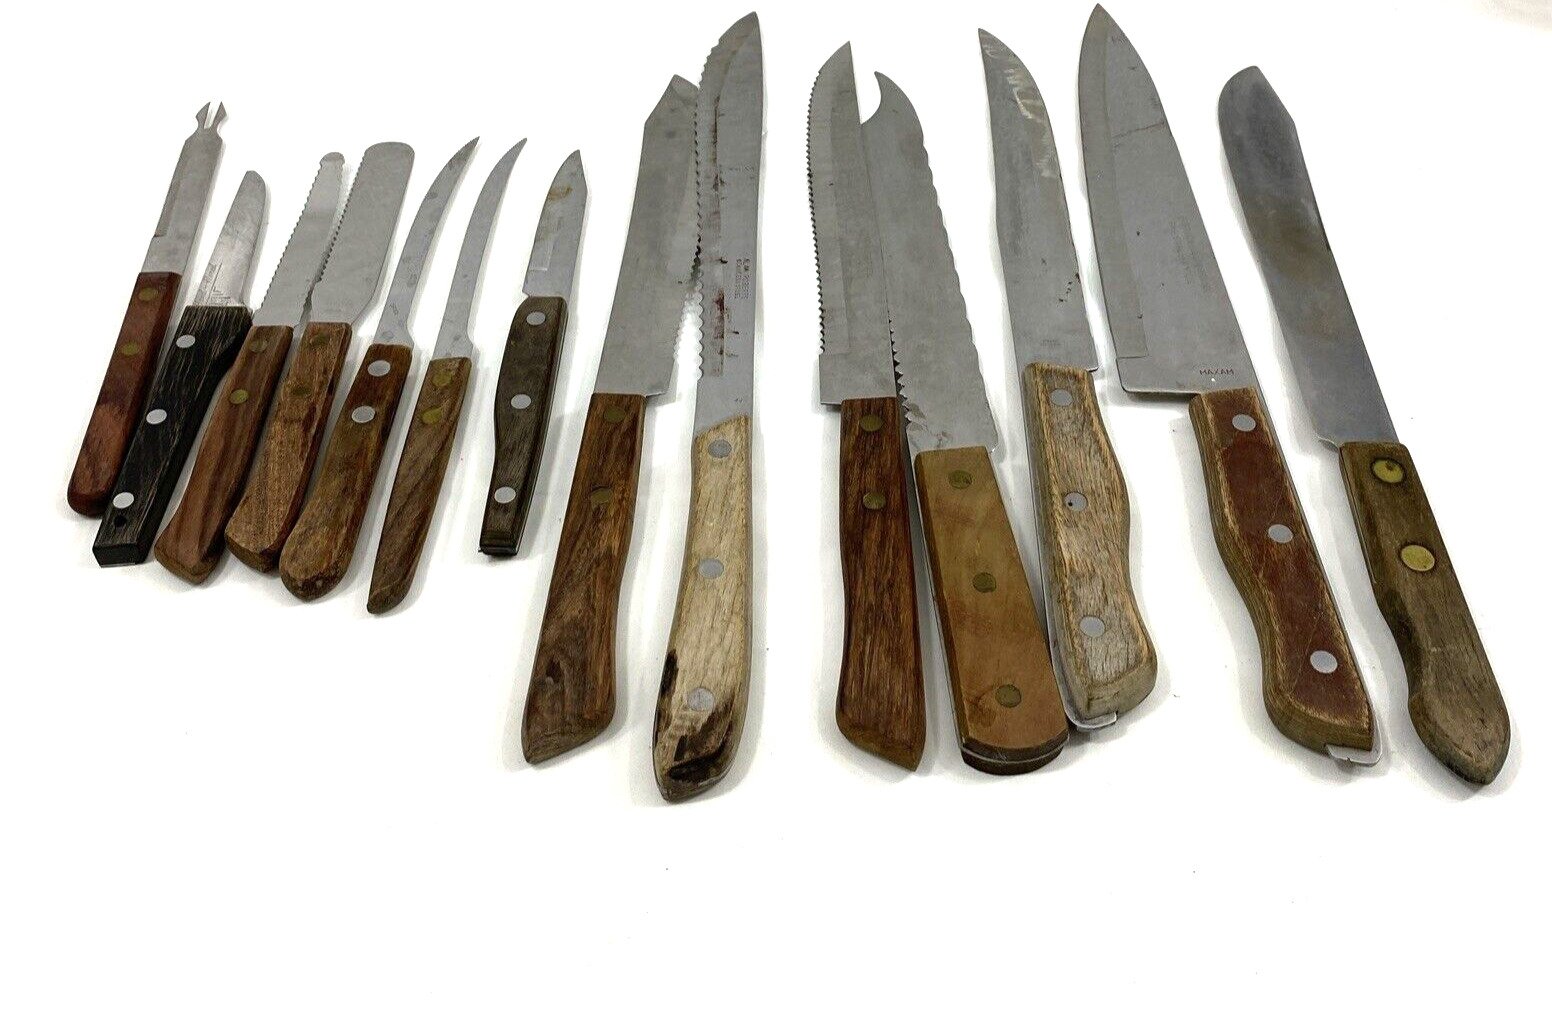 14 Vintage Stainless Steel Knives Japan Wood Handles Different Sized Blades